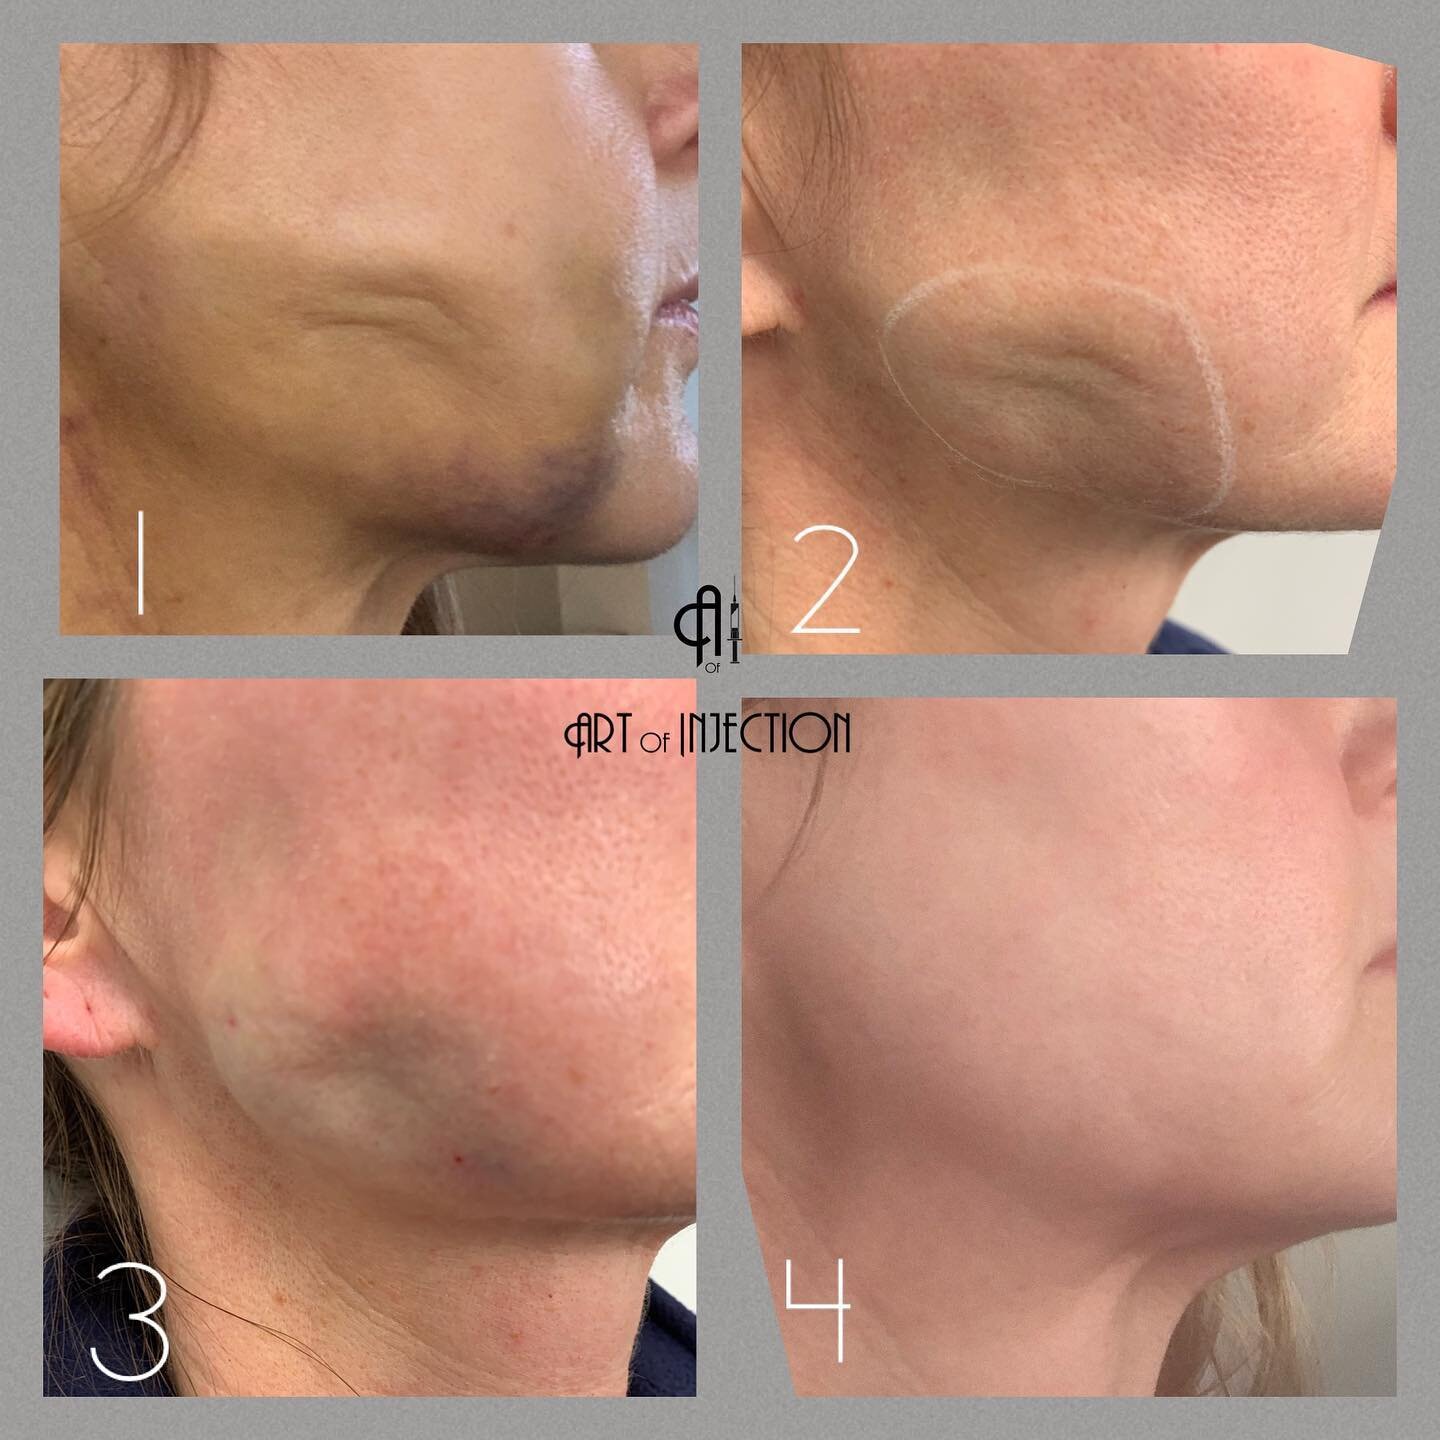 Injectables for scar tissue revision??
𝕪𝕖𝕤! 𝕚𝕥 𝕔𝕒𝕟 𝕓𝕖 𝕕𝕠𝕟𝕖.
.
.
This patient came to see me after being treated with laser liposuction at another practice. She was left with dense scar tissue, indentations and some volume deficit. 
It d